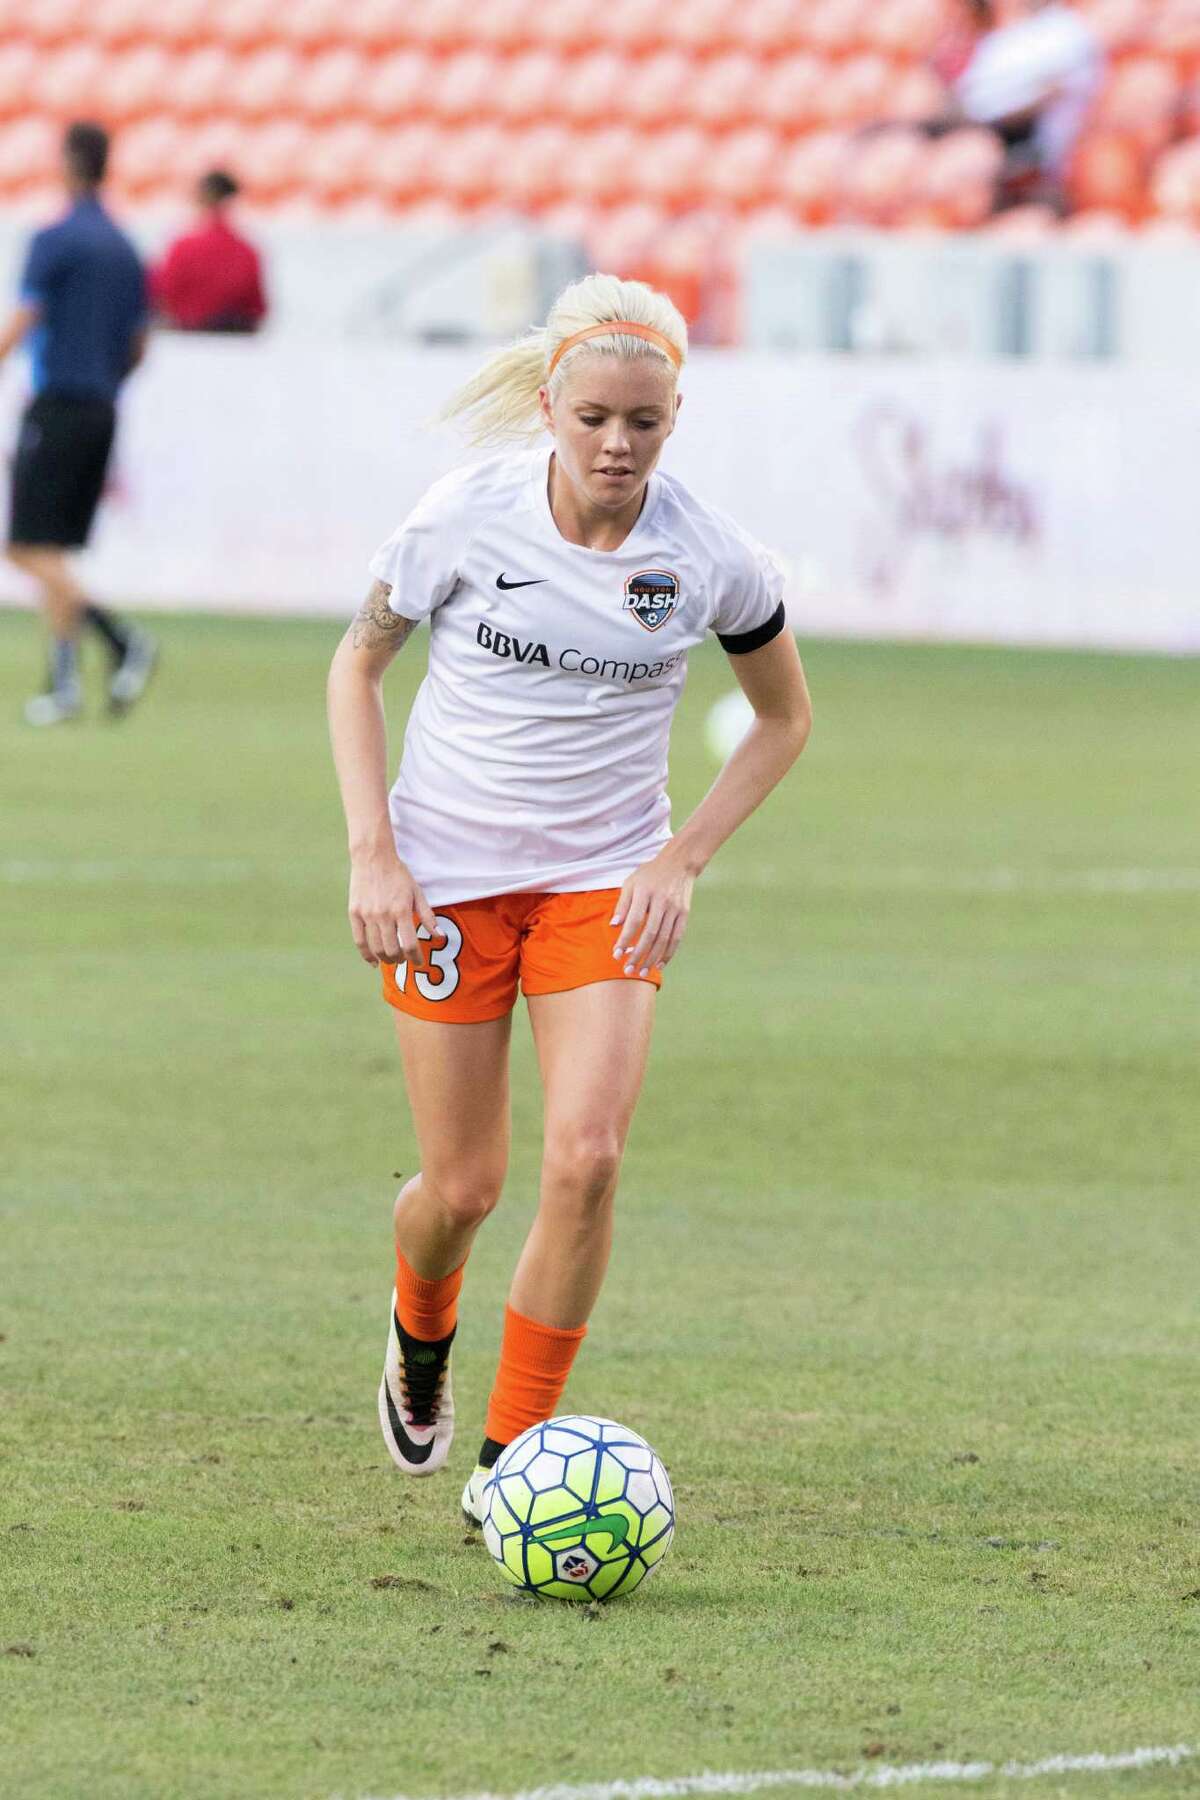 Houston Dash midfielder Denise O'Sullivan (13) warms up on the field against the FC Kansas City before action between the Houston Dash and the FC Kansas City during a soccer game at BBVA Compass, Sunday, June 19, 2016, in Houston. FC Kansas City defeated Houston Dash 1-0. ( Juan DeLeon / for the Houston Chronicle )